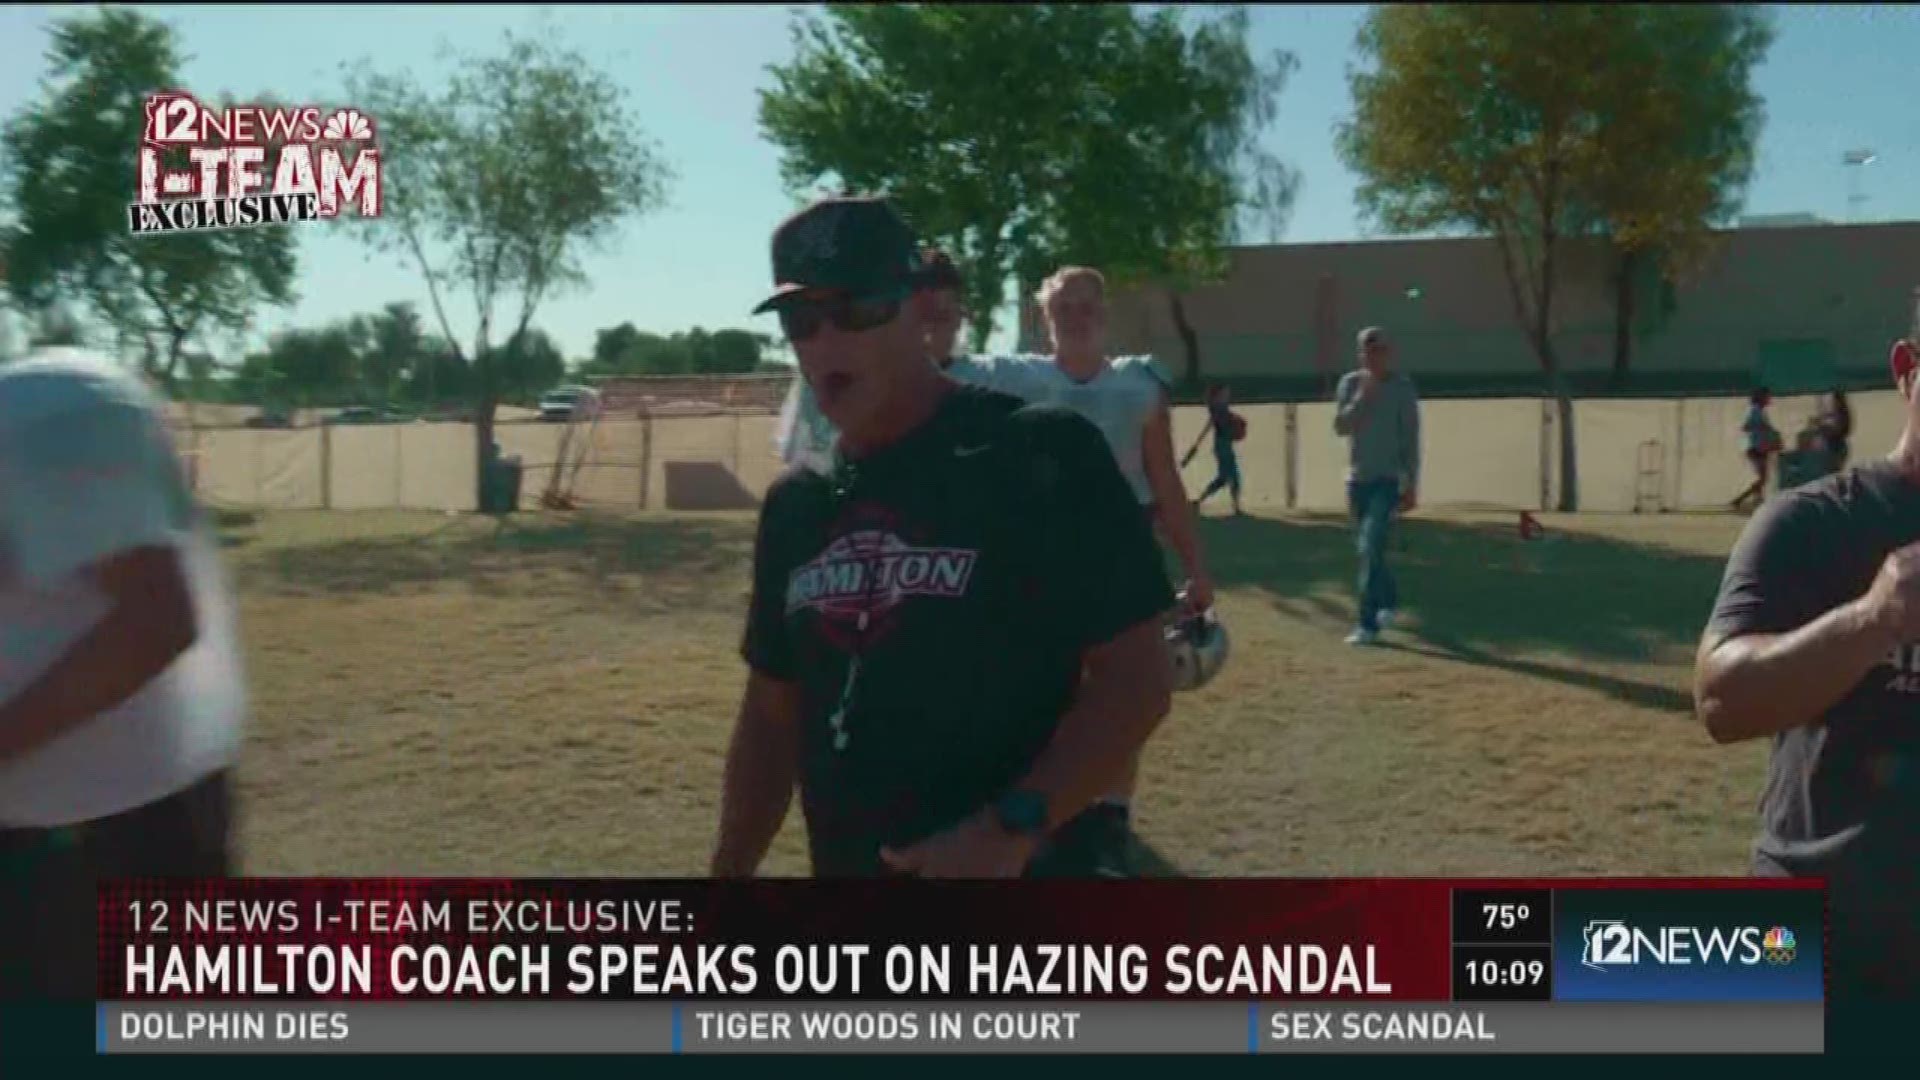 The Hamilton High School football team is trying to focus on the field amid a hazing scandal.